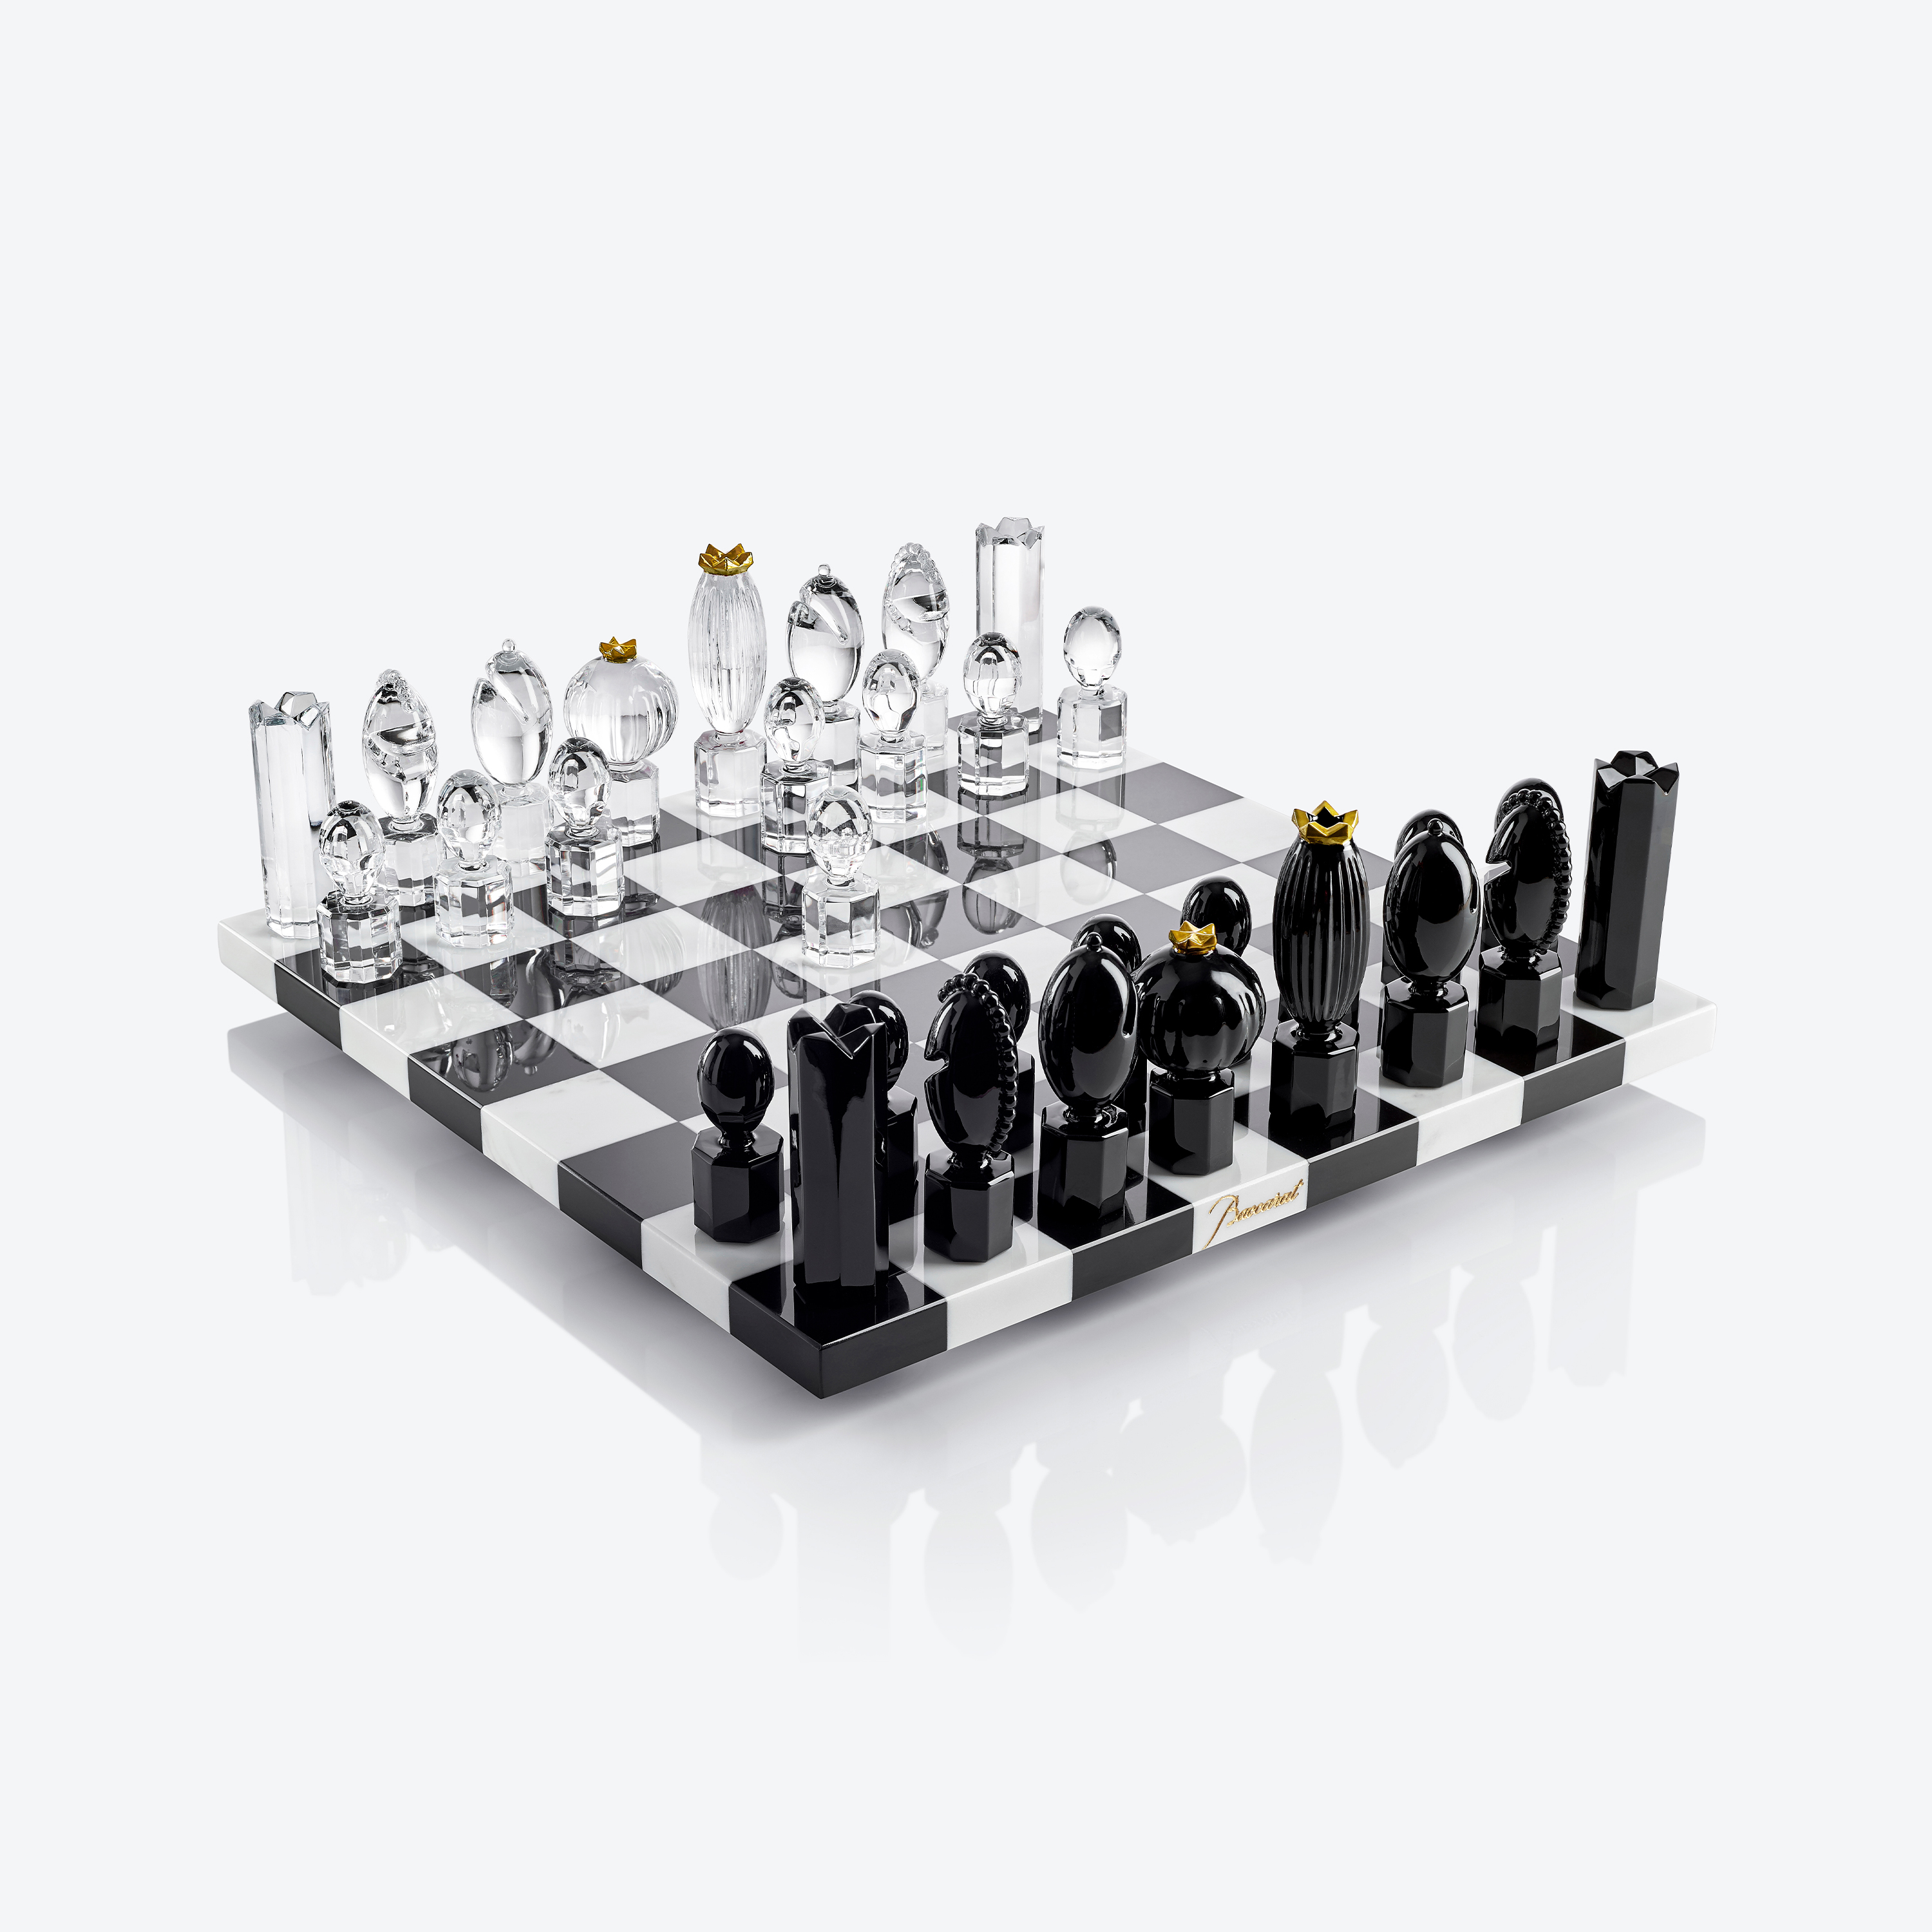 Mirror Chess Is Not Good Cyber